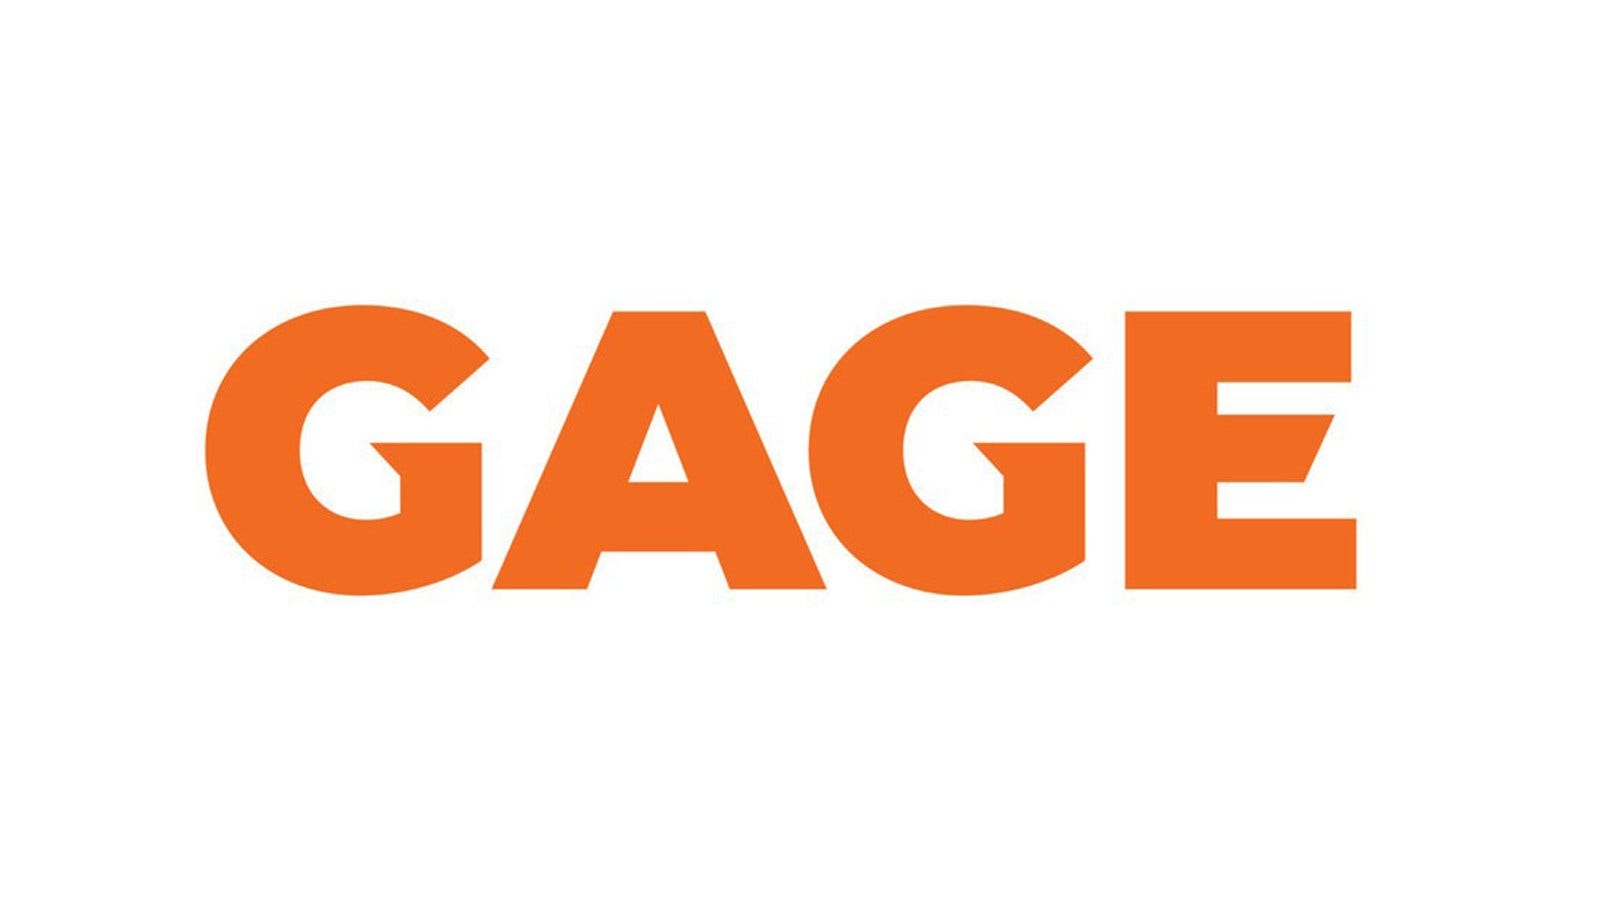 Gage Posts Record Q3 $27.2M Revenue Ahead Of Acquisition By TerrAscend